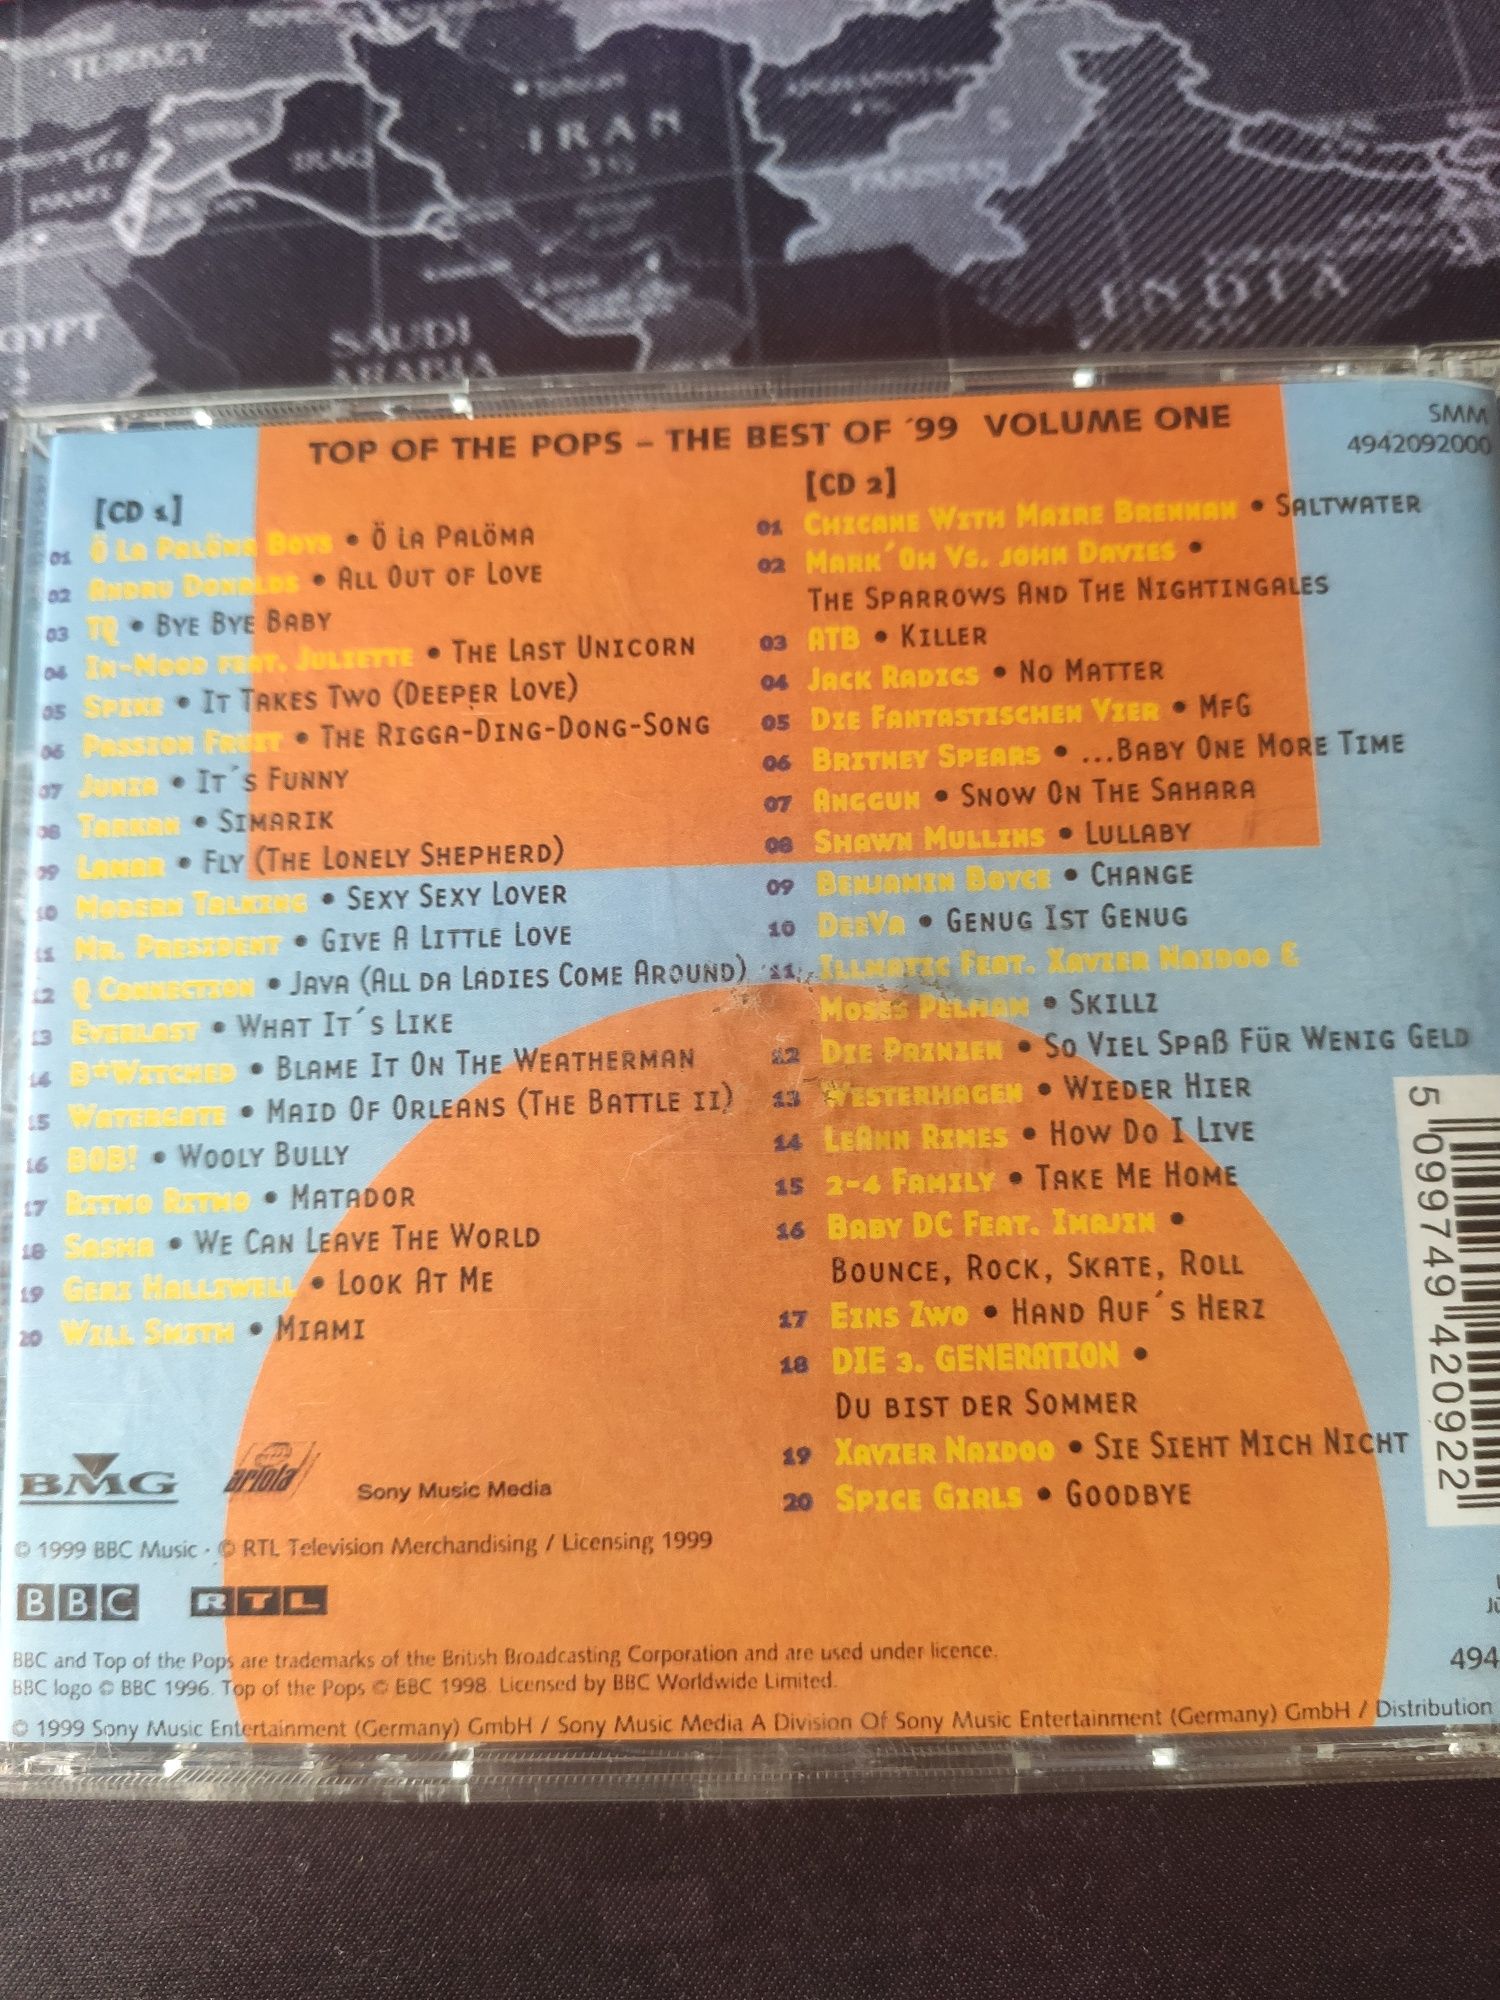 Top of the pops the best of '99 volume one 2CD